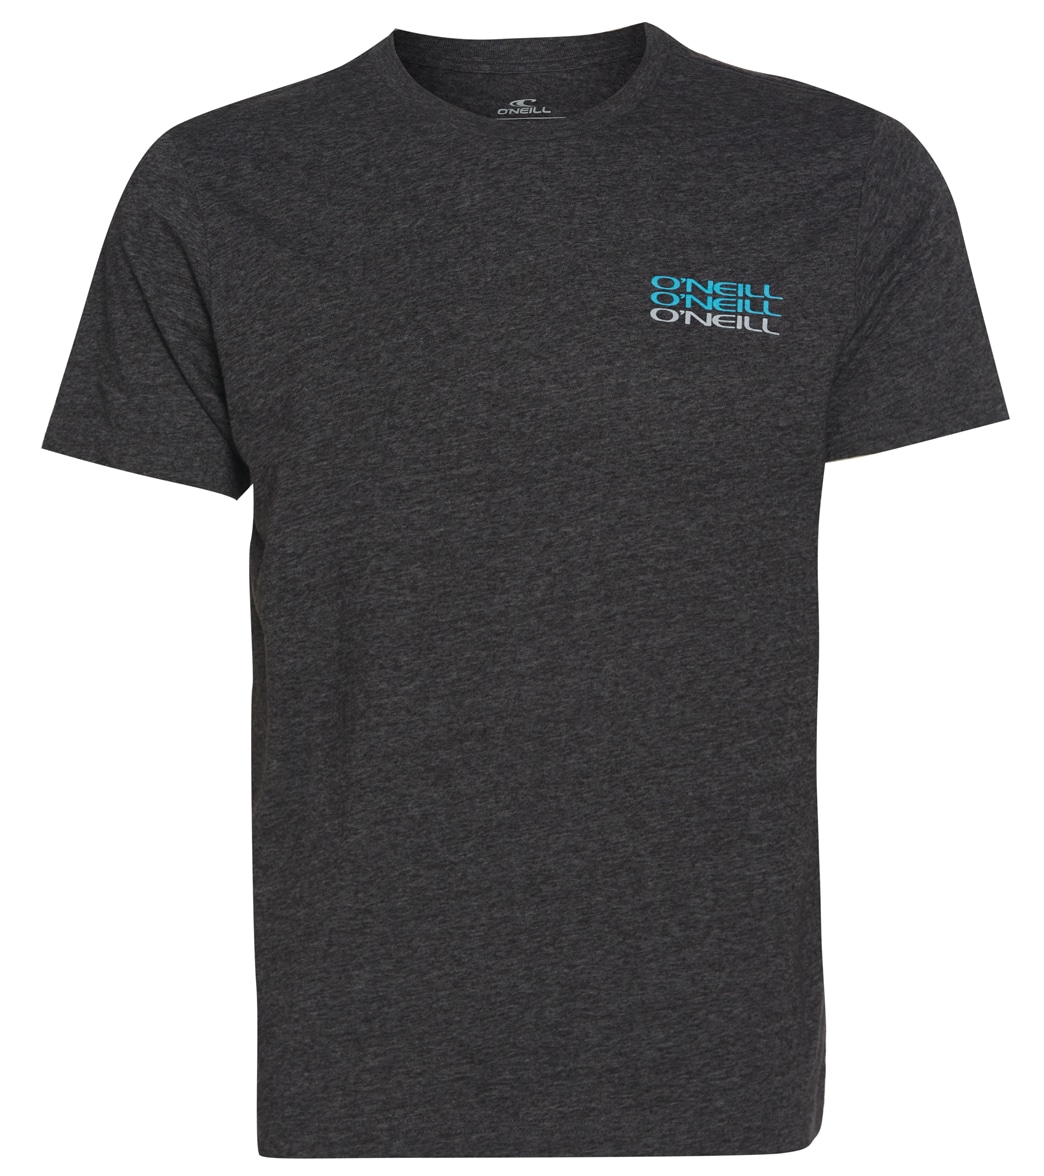 O'neill Men's Circle Surfer Tee Shirt - Black Heather Large Cotton/Polyester - Swimoutlet.com